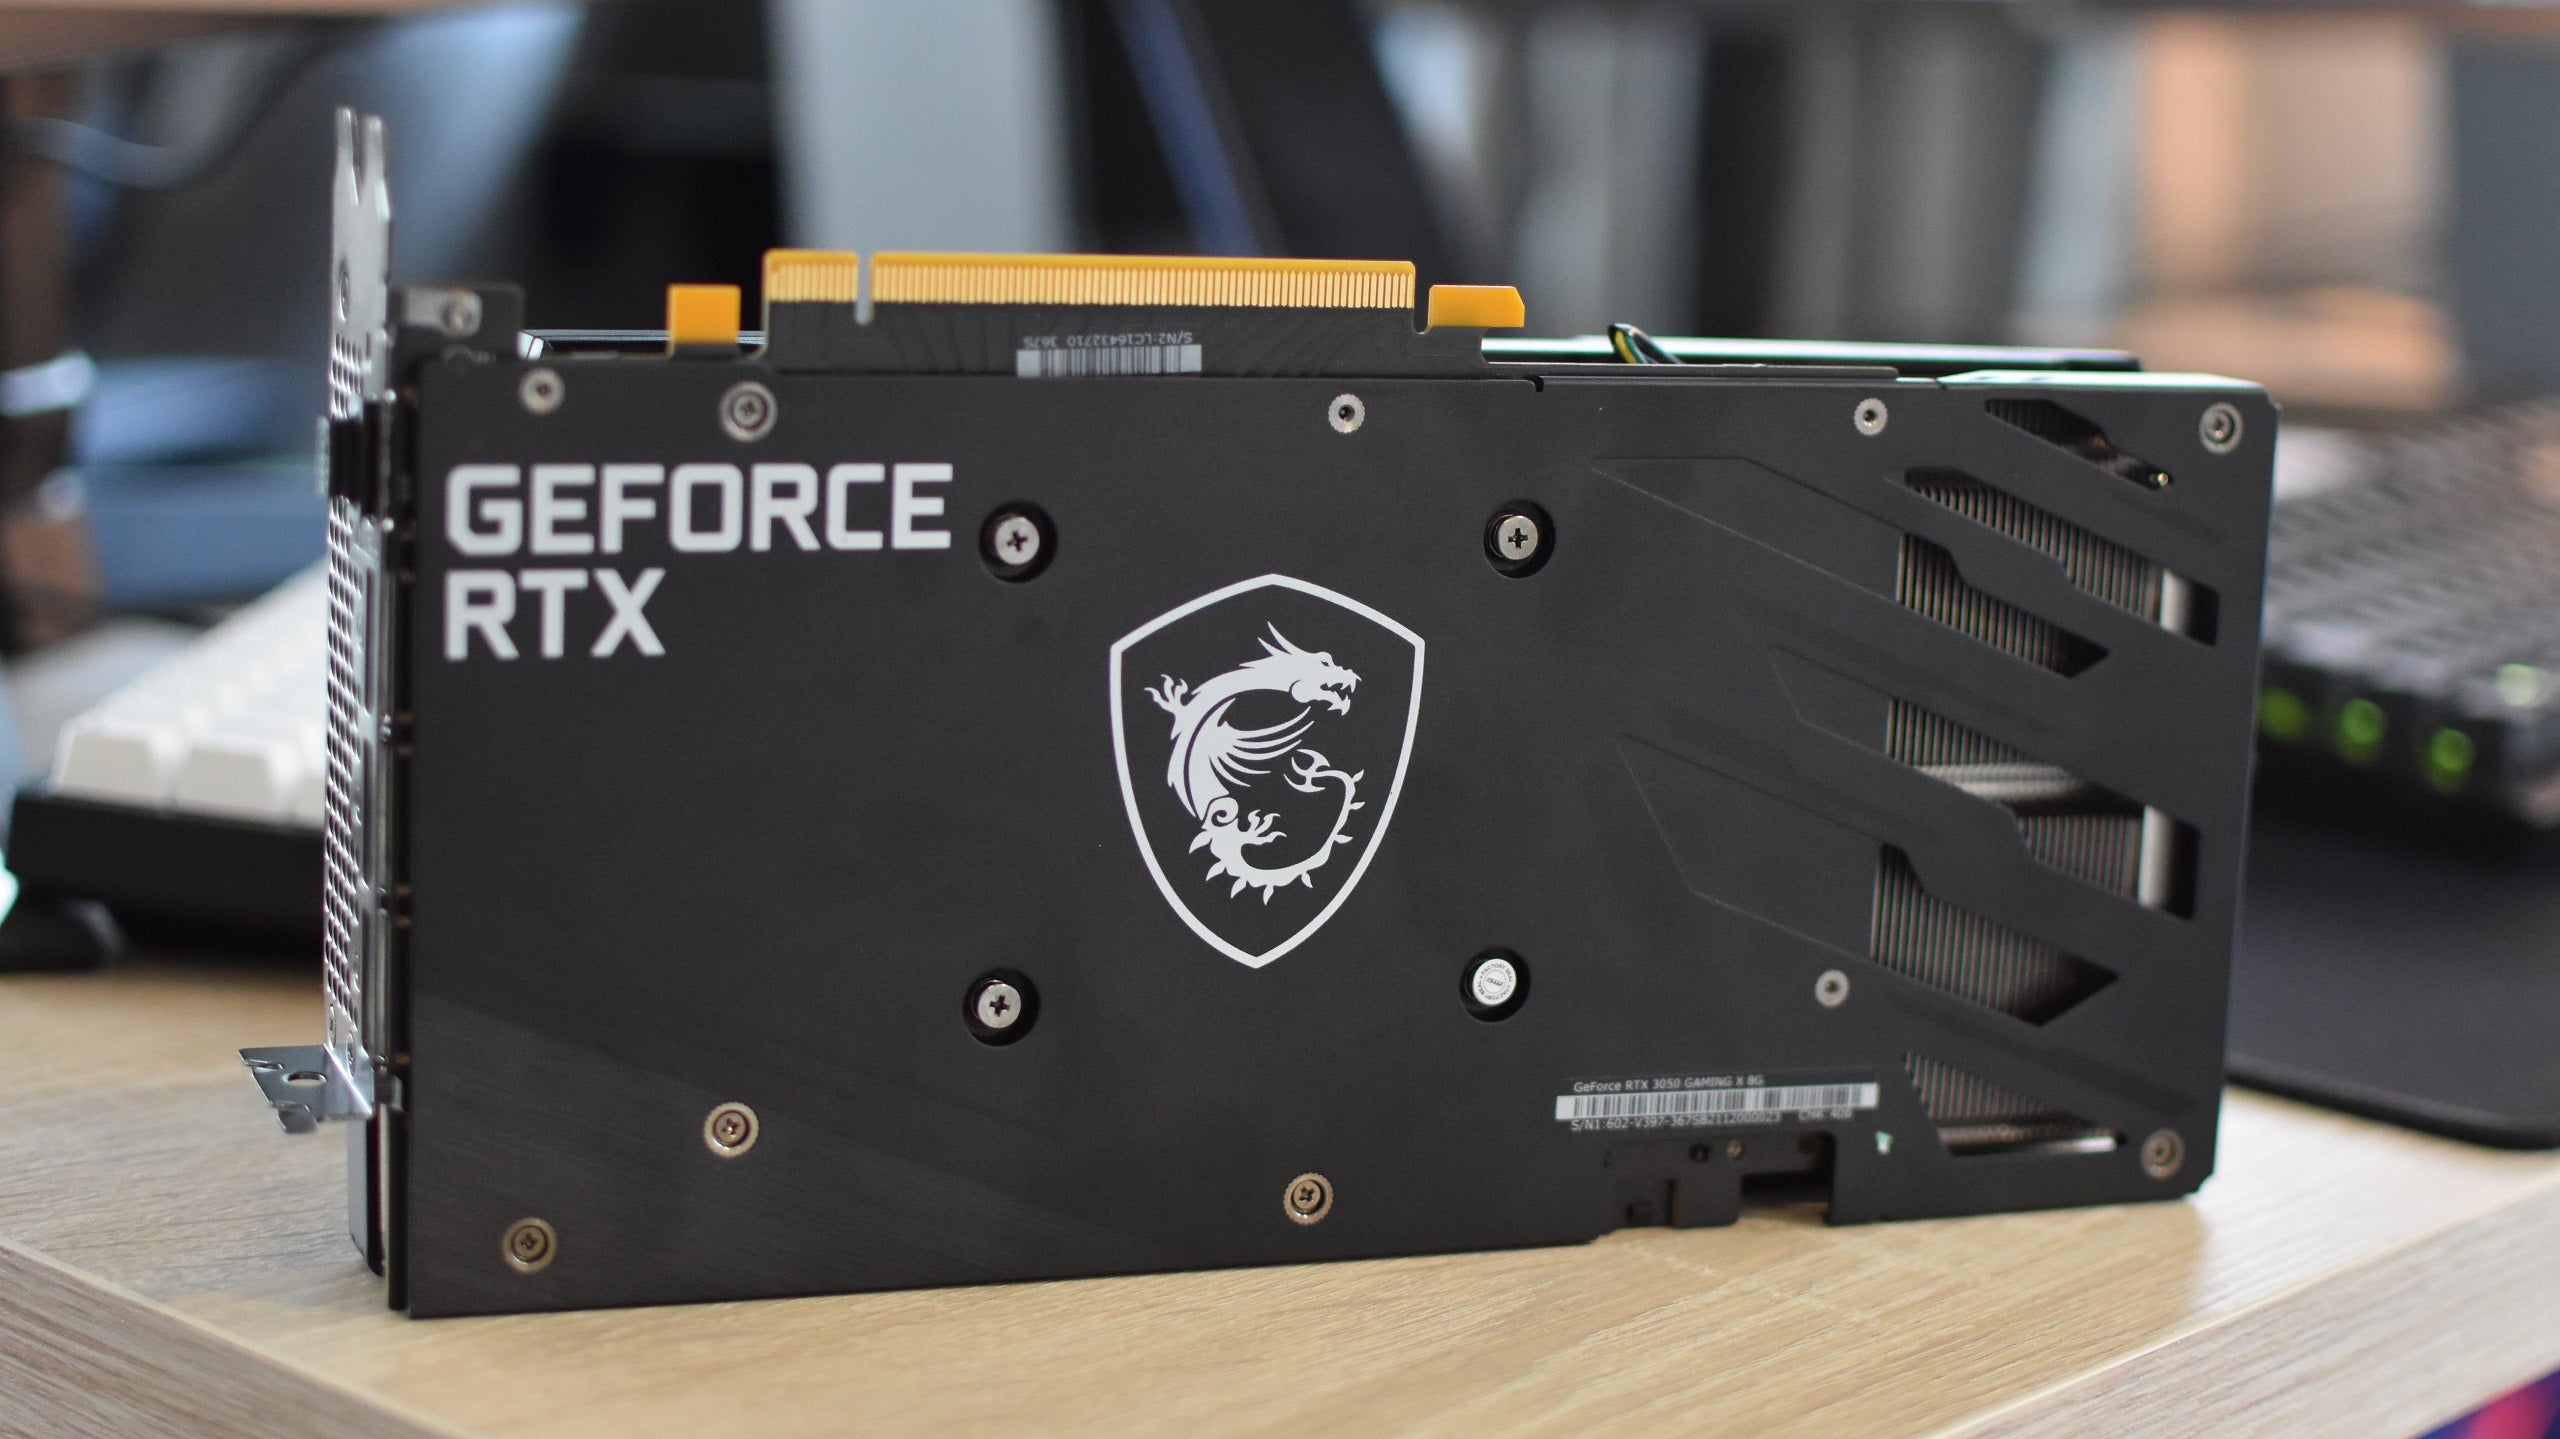 The MSI GeForce RTX 3060 Gaming X Trio on a desk, showing its reinforced backplate.